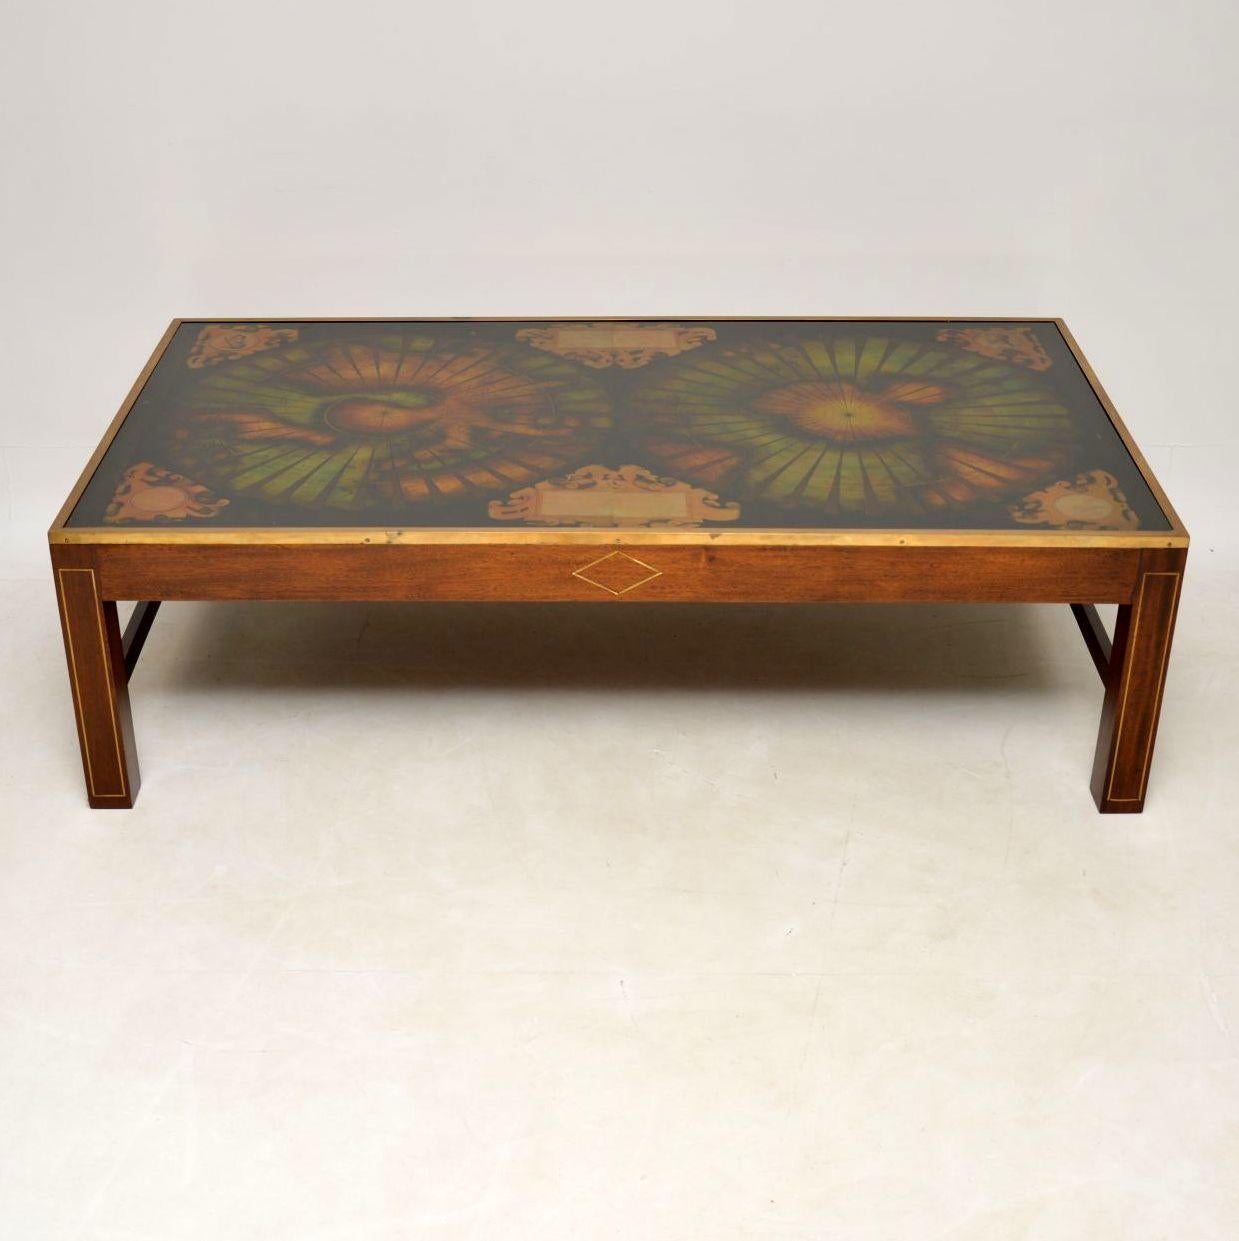 This antique atlas coffee table is extremely large and it's very hard to get the right perspective of the real size in the images, so please double check the measurements. As we all know, large antique coffee tables are very hard to find. I think